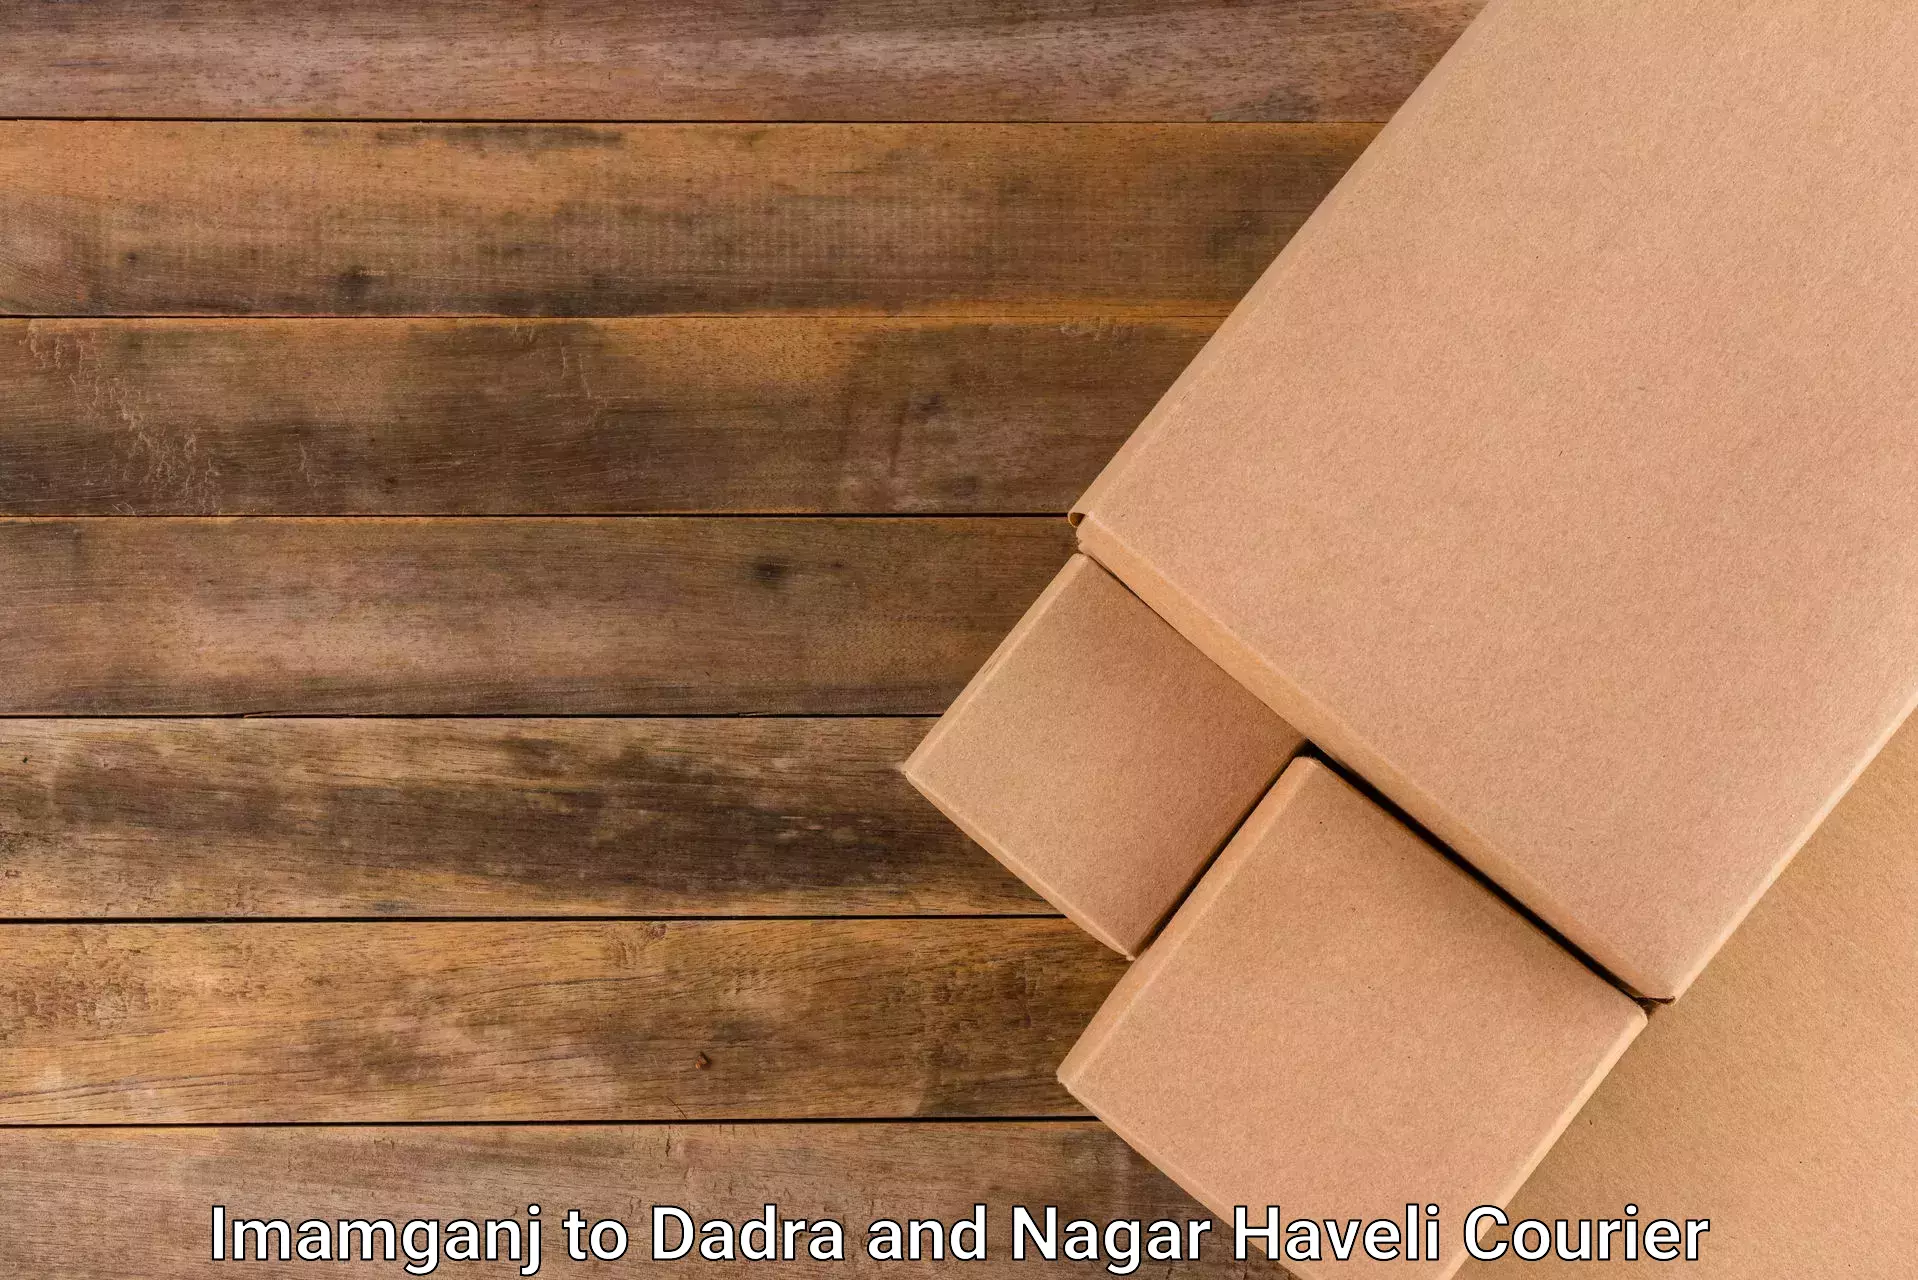 Comprehensive shipping services in Imamganj to Dadra and Nagar Haveli